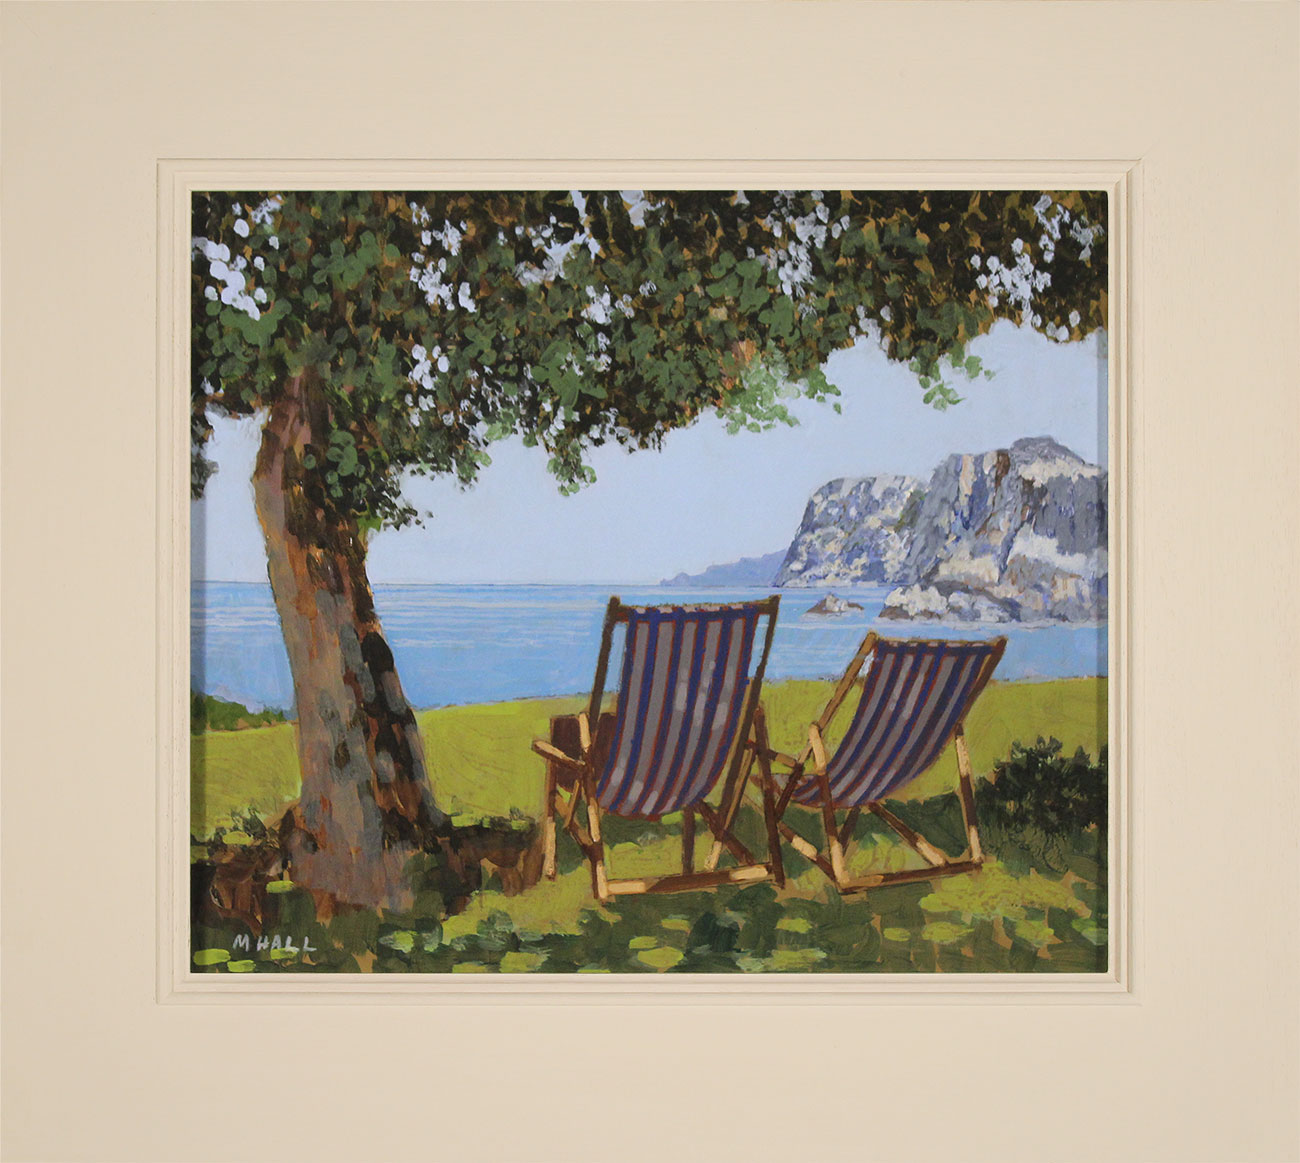 Mike Hall, Original acrylic painting on board, Two Striped Deck Chairs Click to enlarge